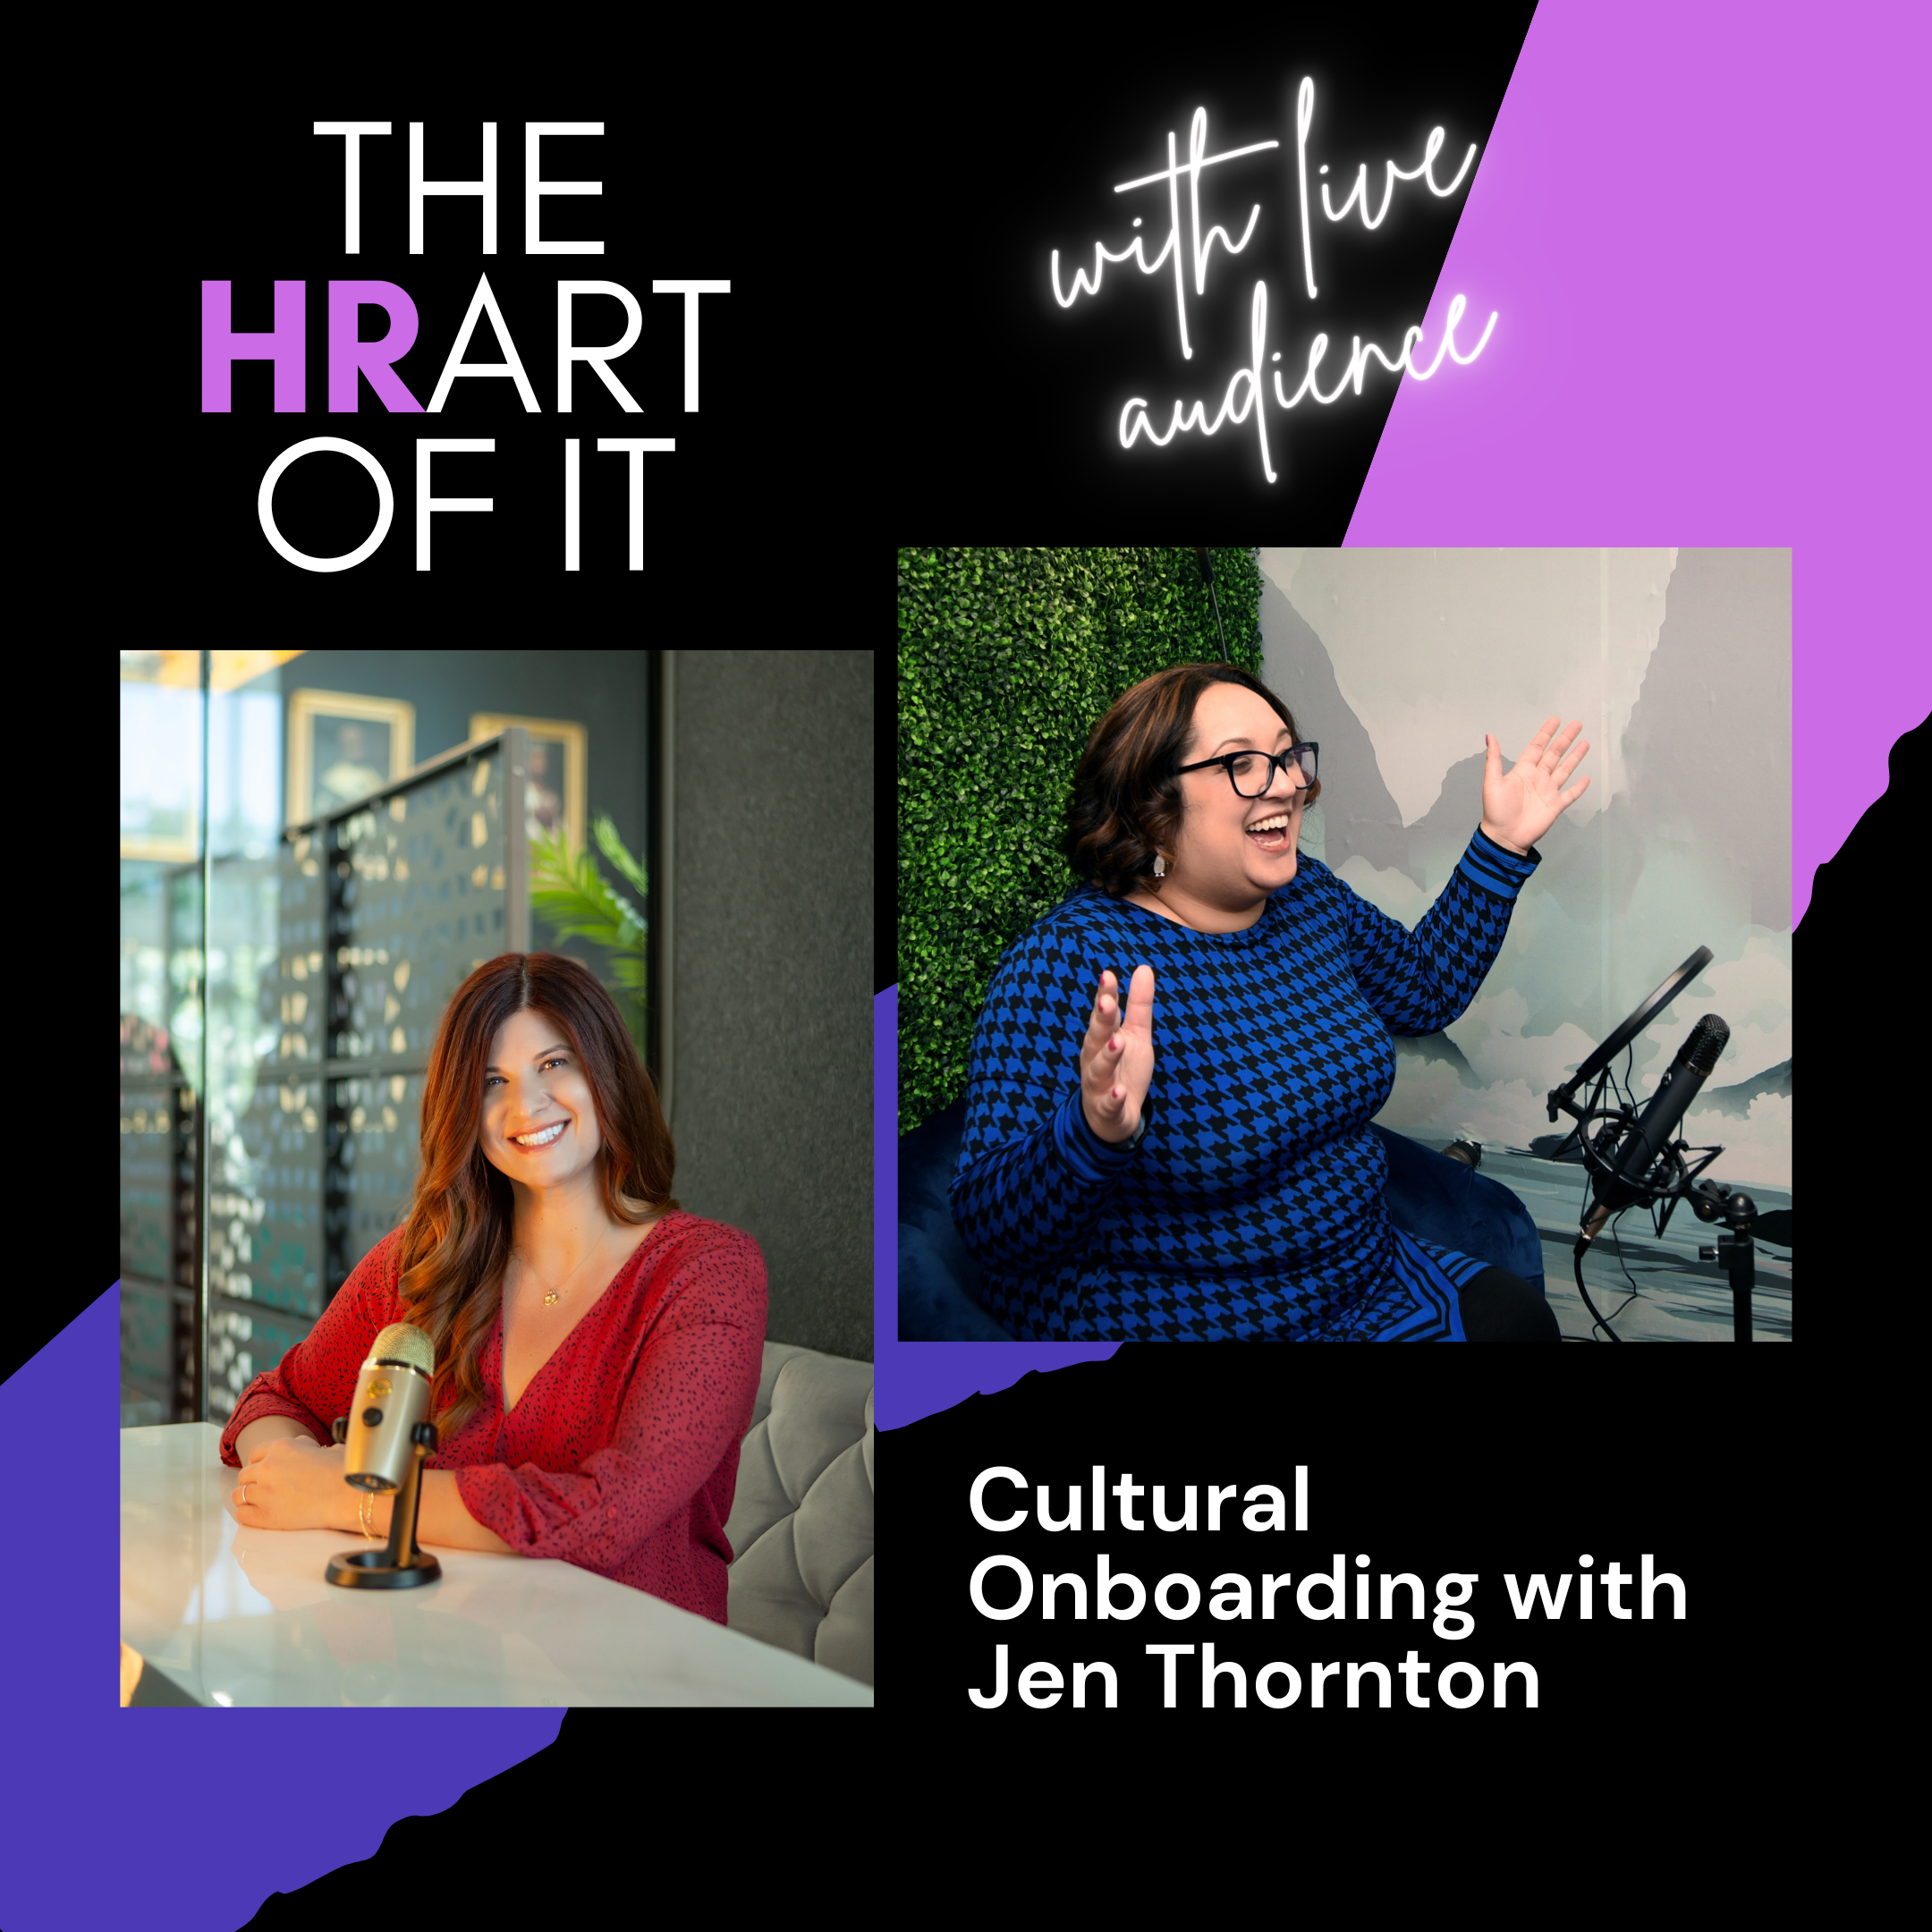 Cultural Onboarding with Jen Thornton